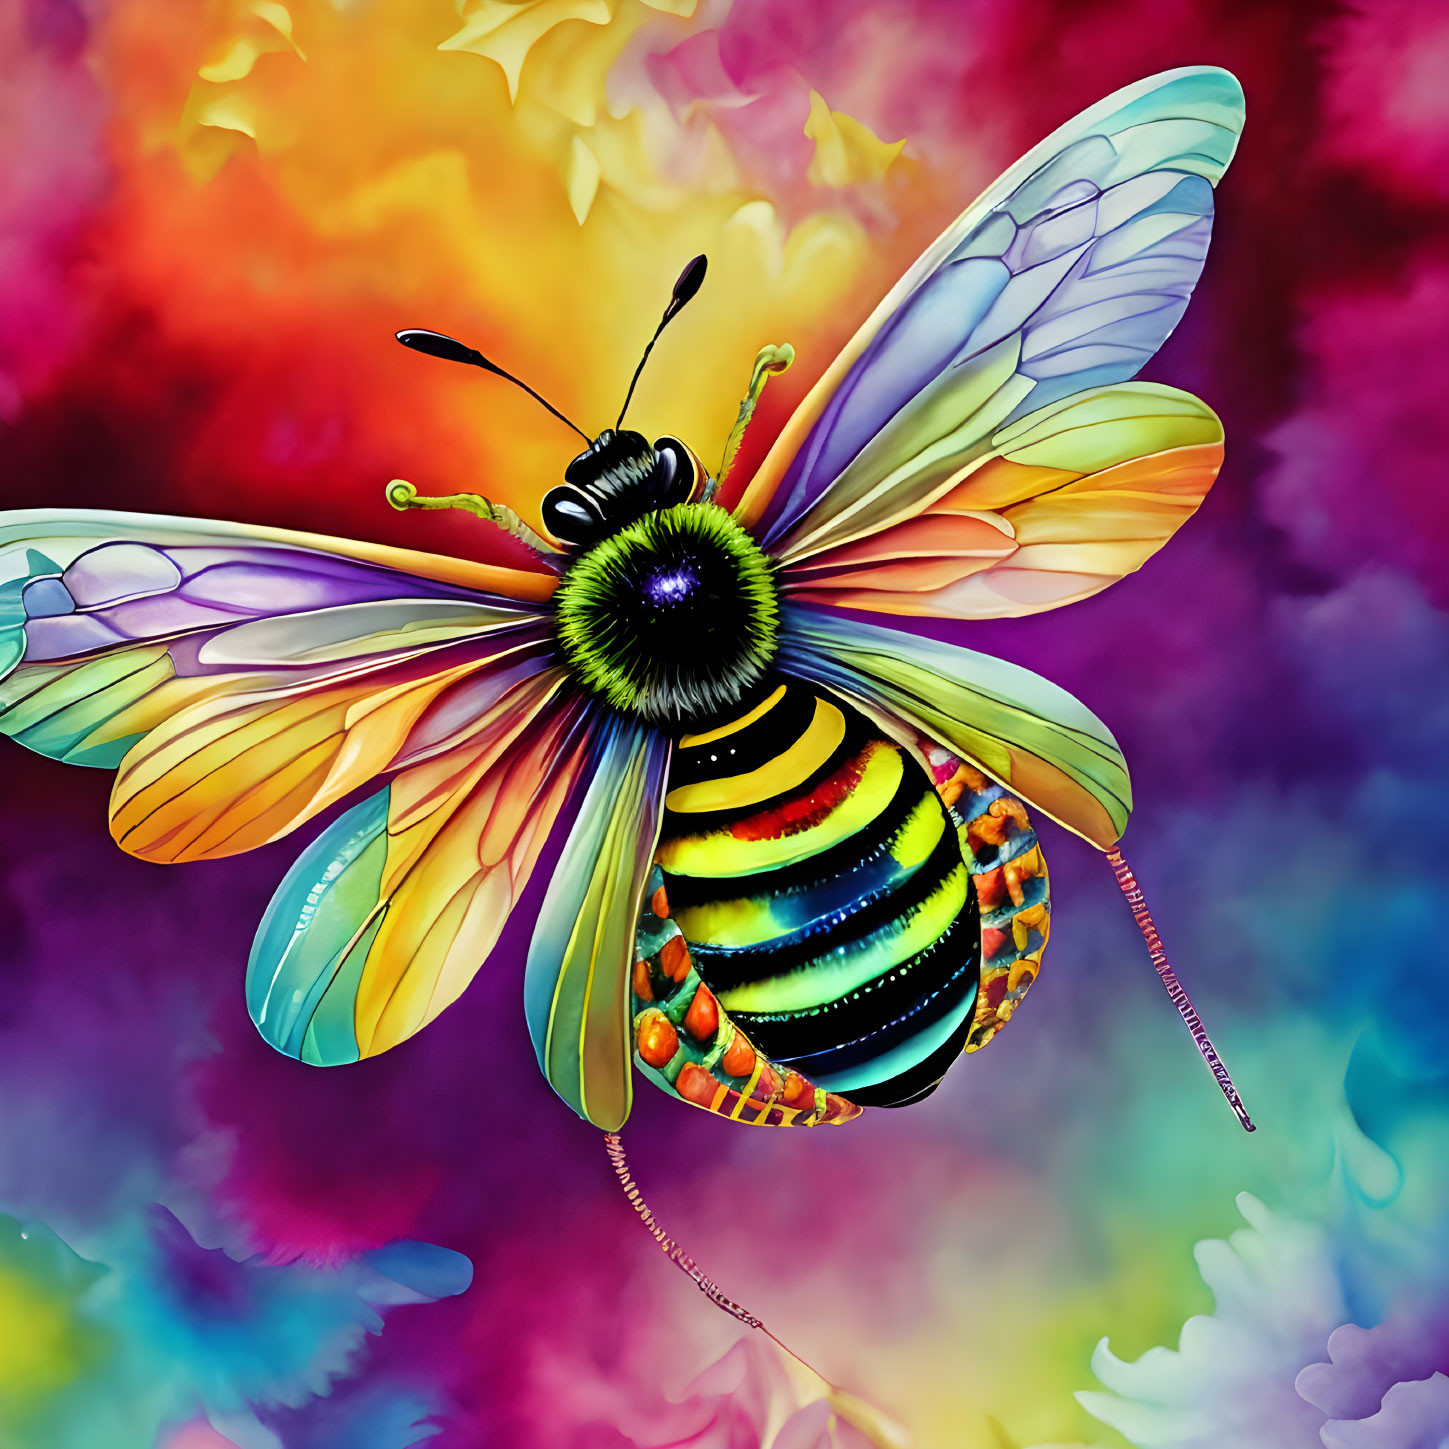 Colorful Digital Illustration of Bee on Vibrant Abstract Background